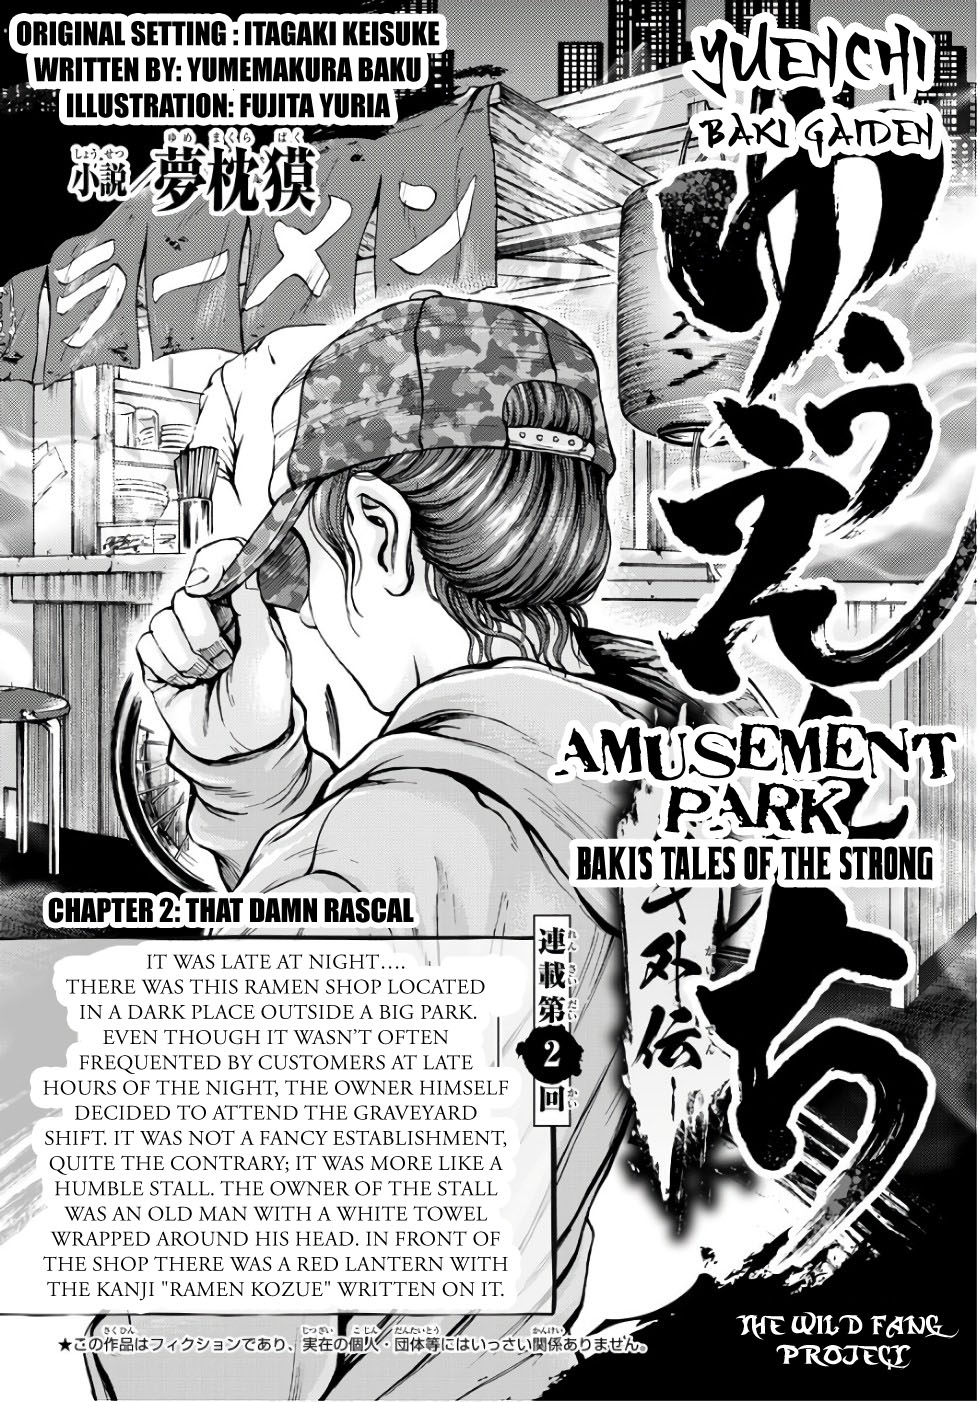 Amusement Park: Baki's Tales Of The Strong - Page 1